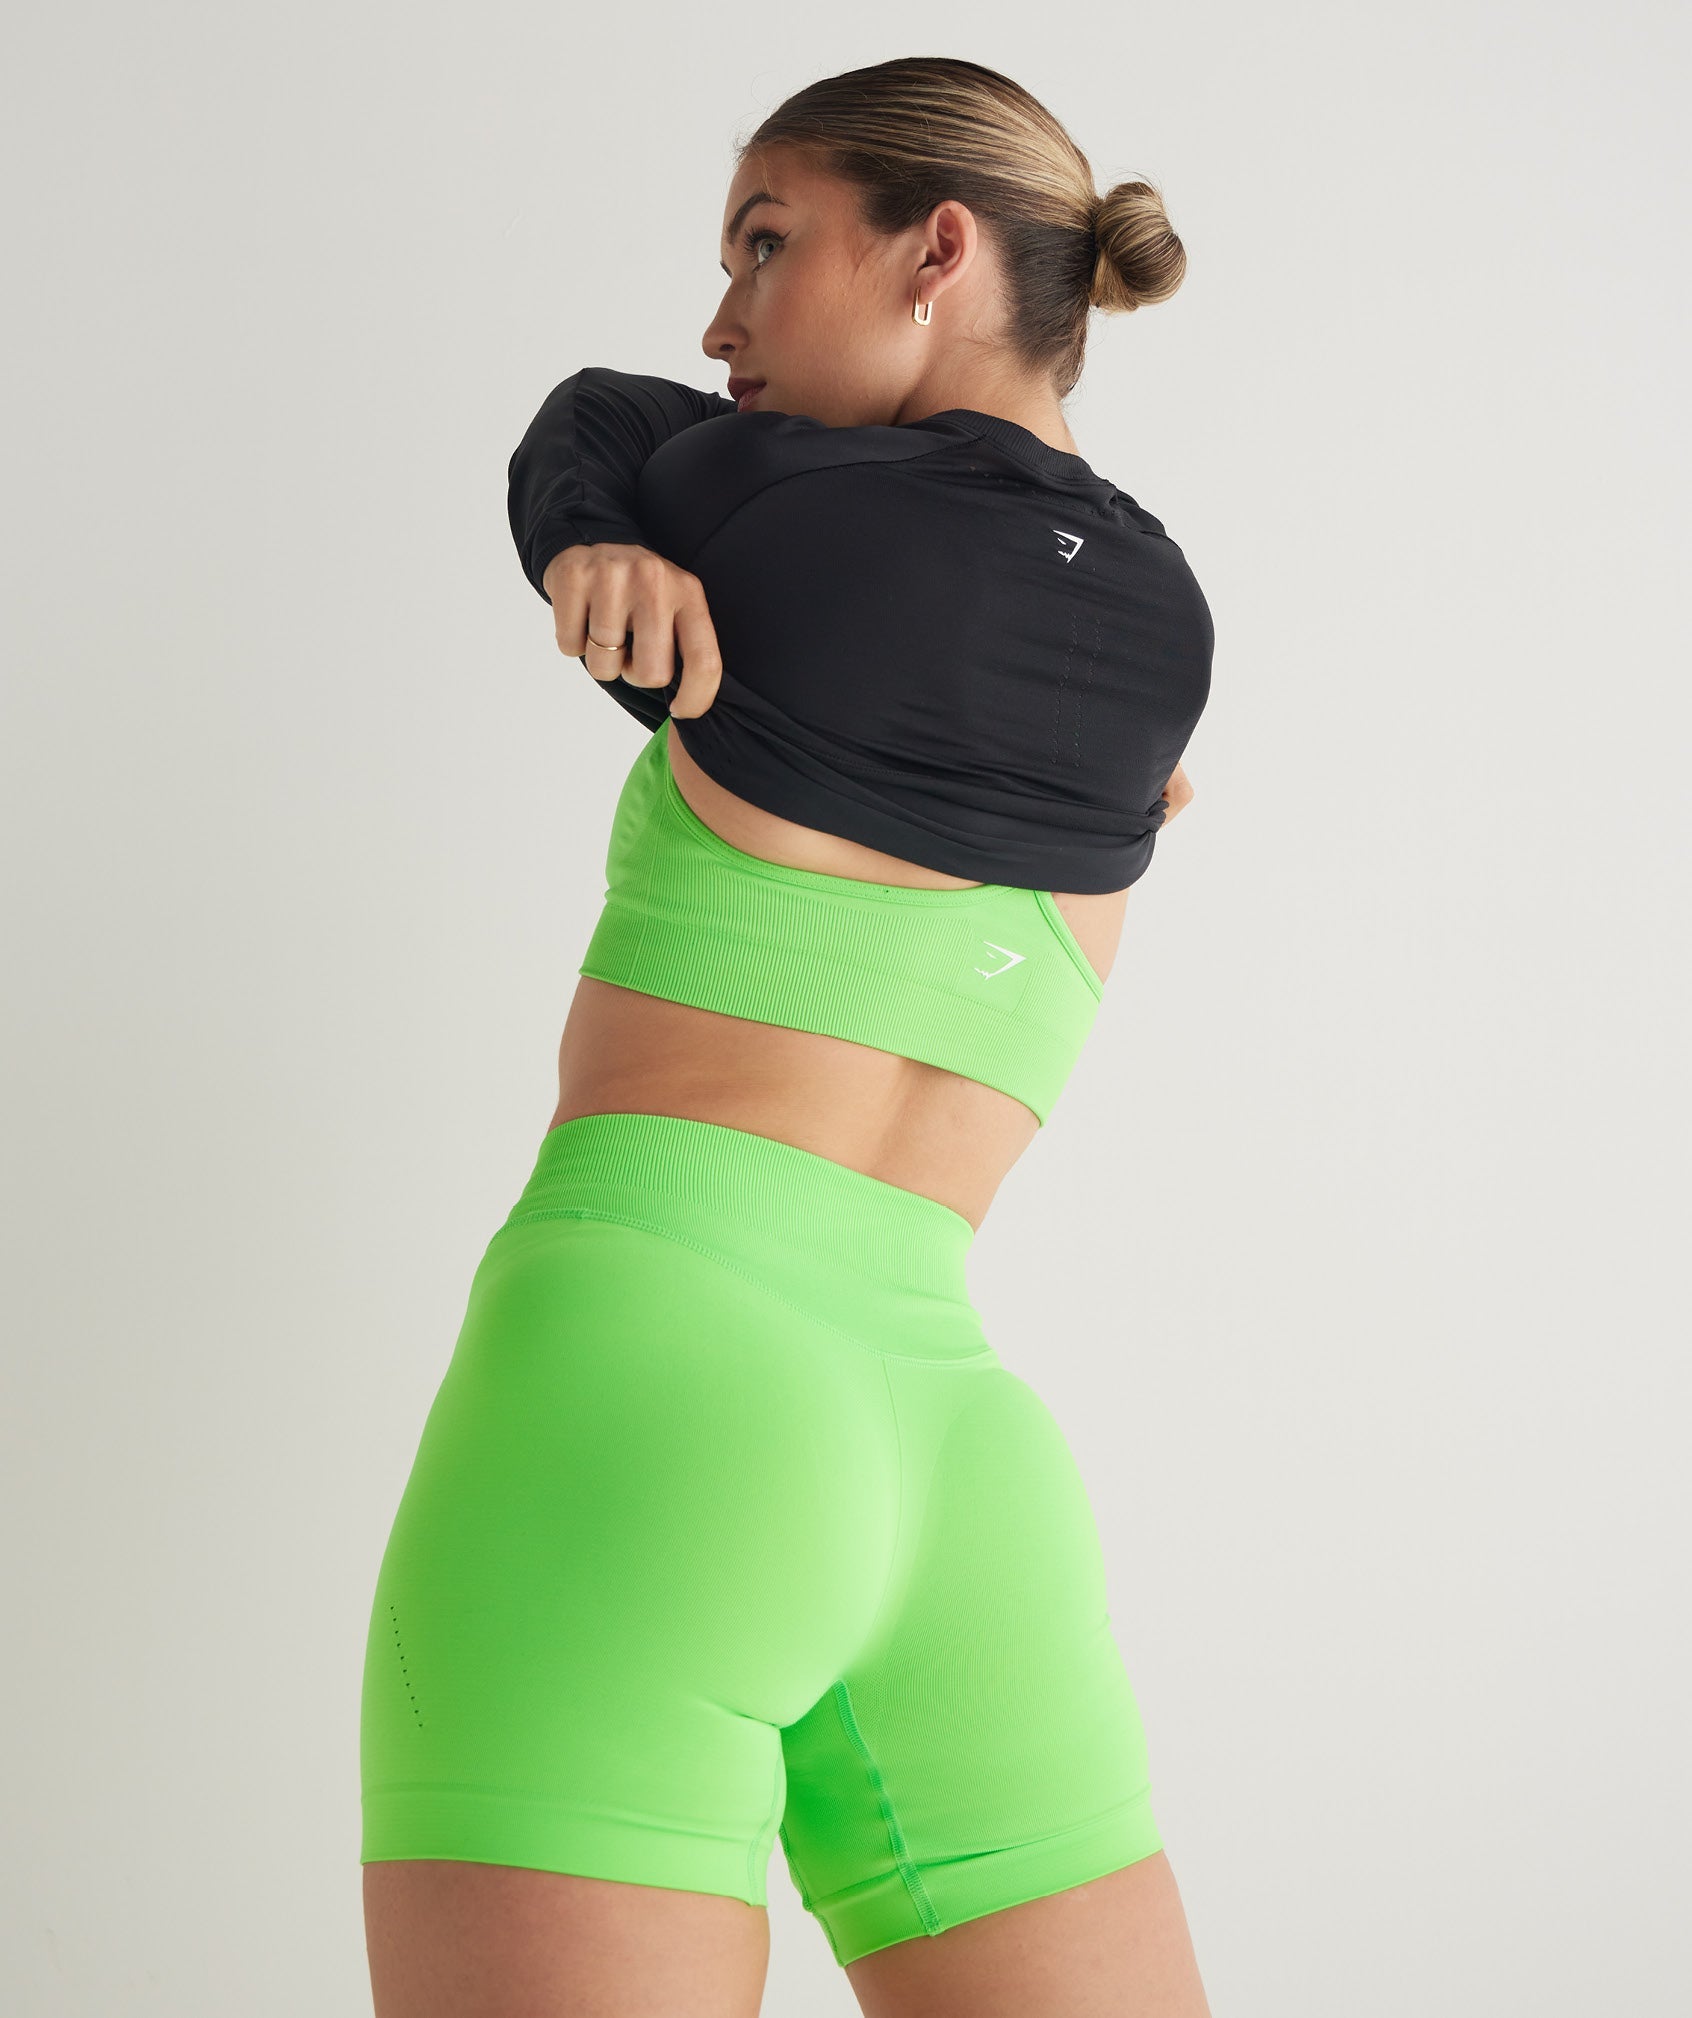 Sweat Seamless Sculpt Shorts in Fluo Lime